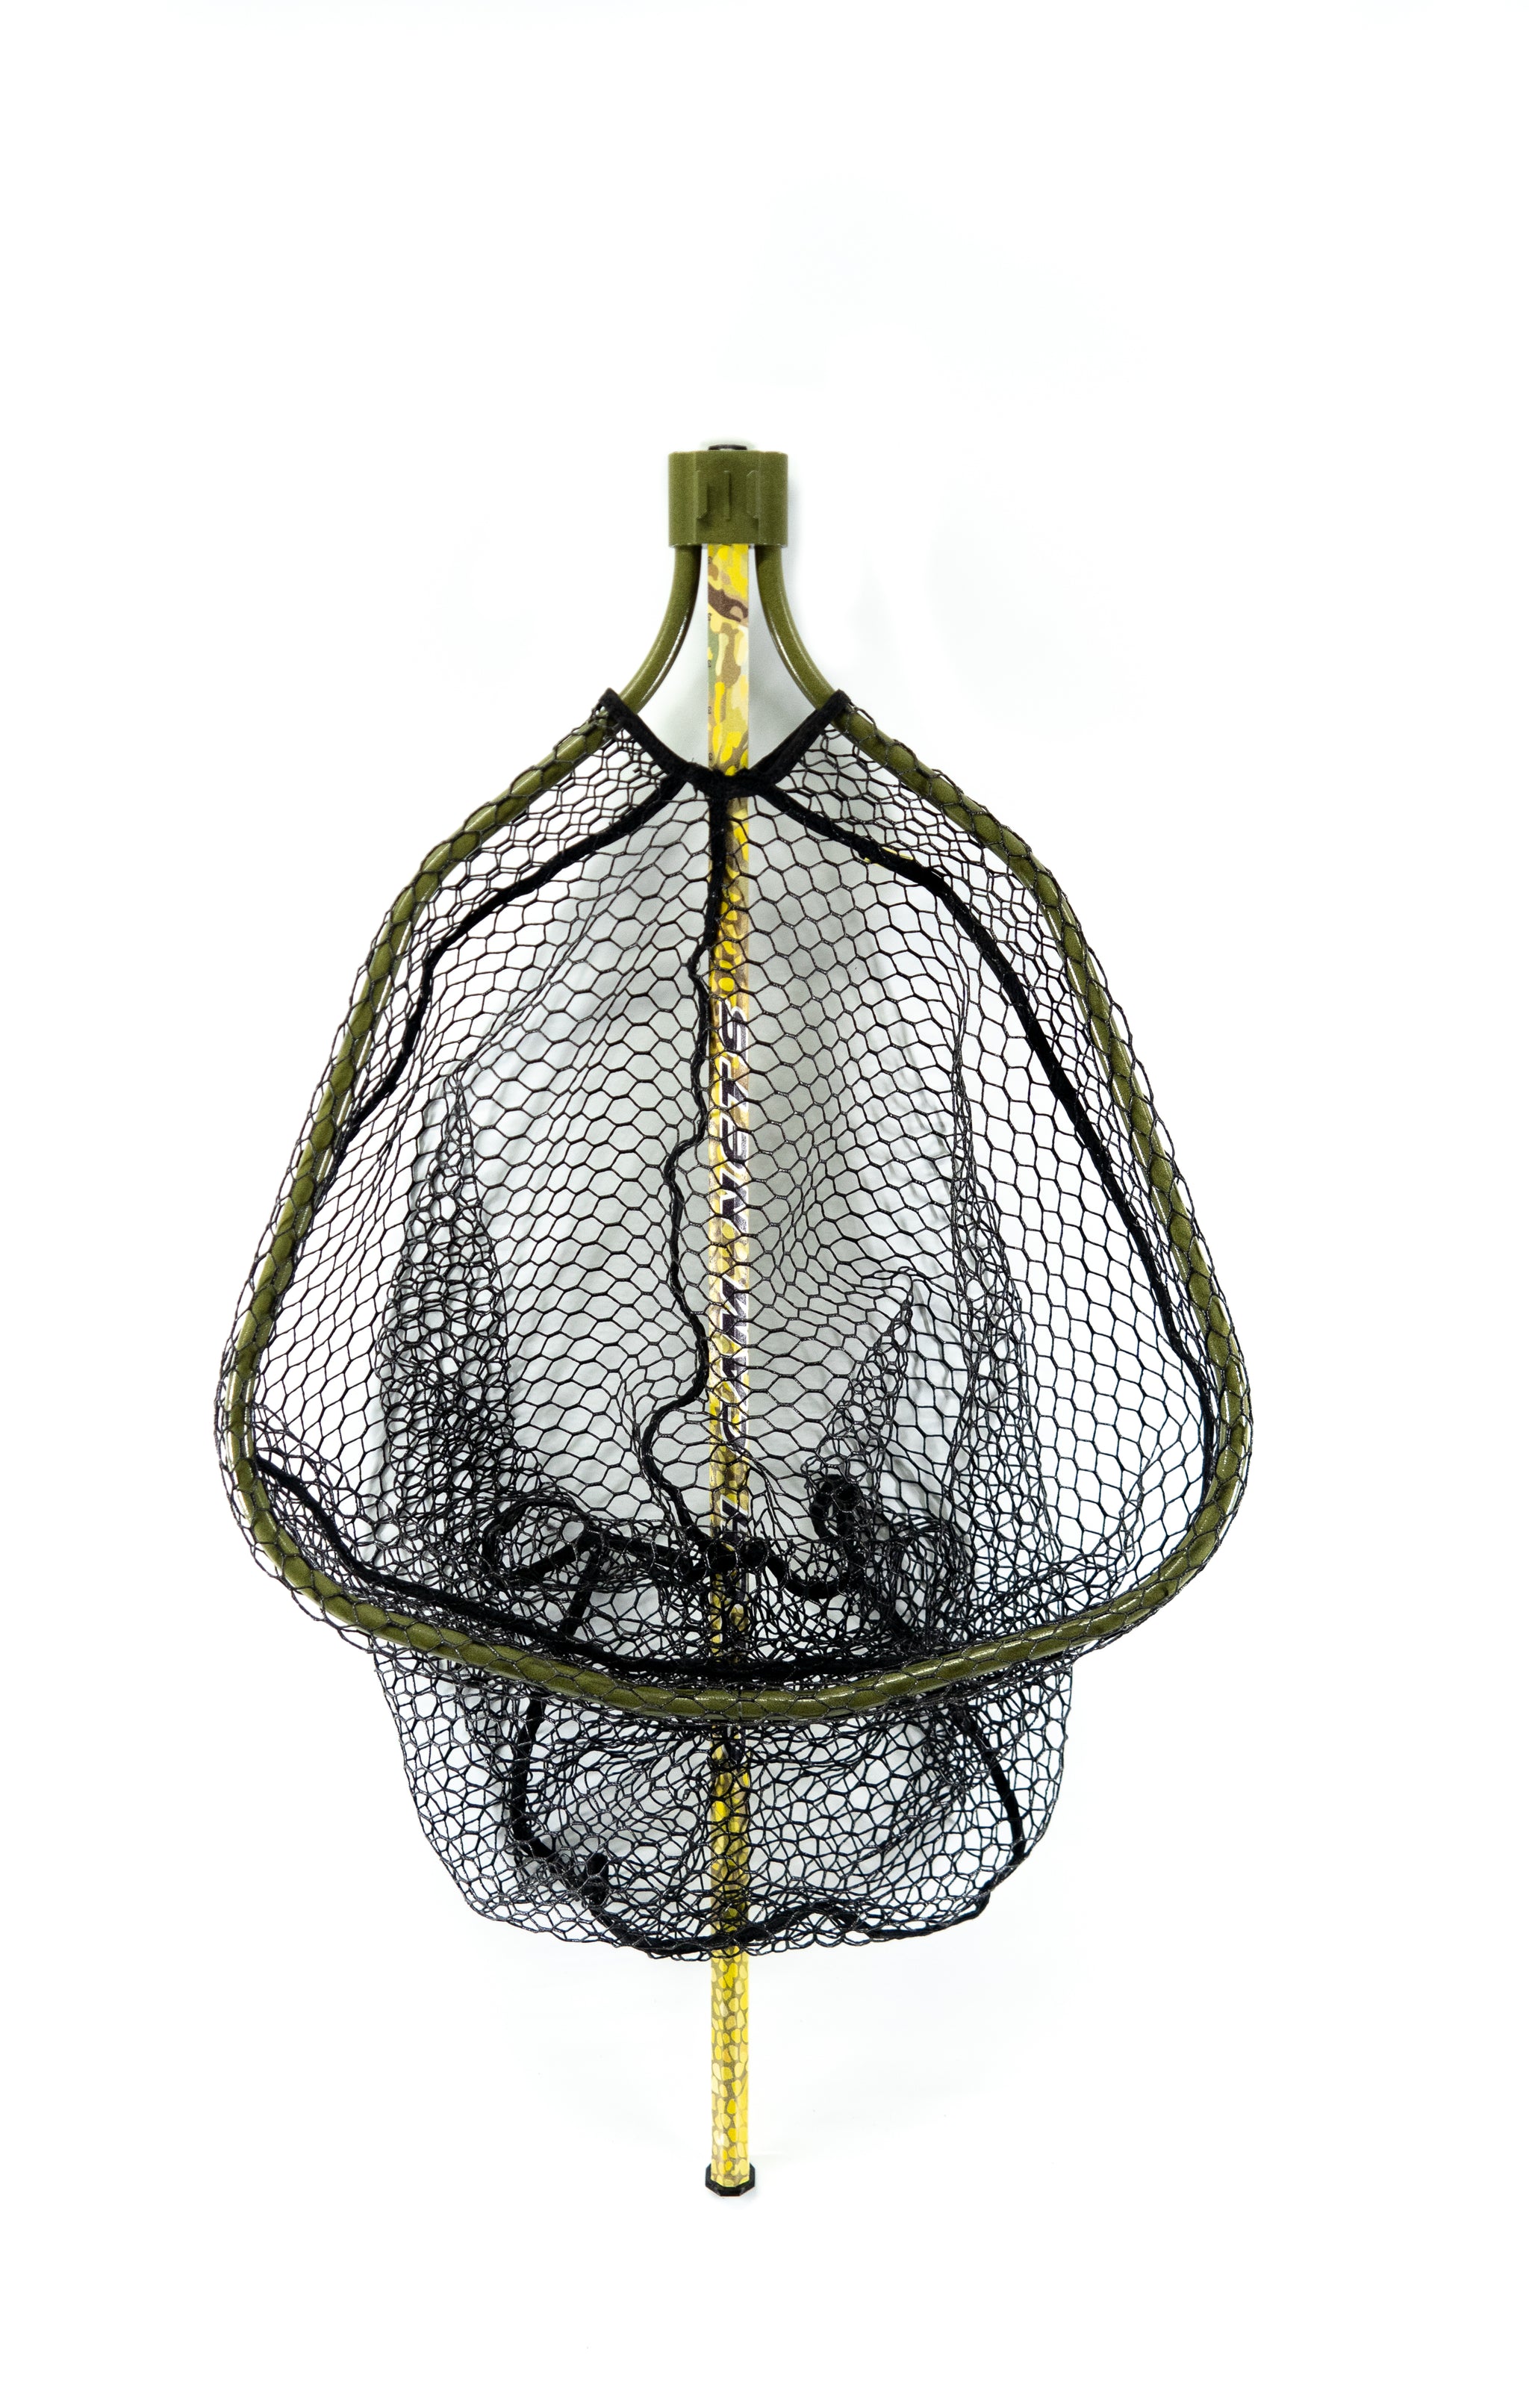  Floating Fishing Net For Steelhead, Salmon, Fly, Kayak,  Catfish, Bass, Trout Fishing, Rubber Coated Landing Net For Easy Catch &  Release, Compact & Foldable For Easy Transportation & Storage